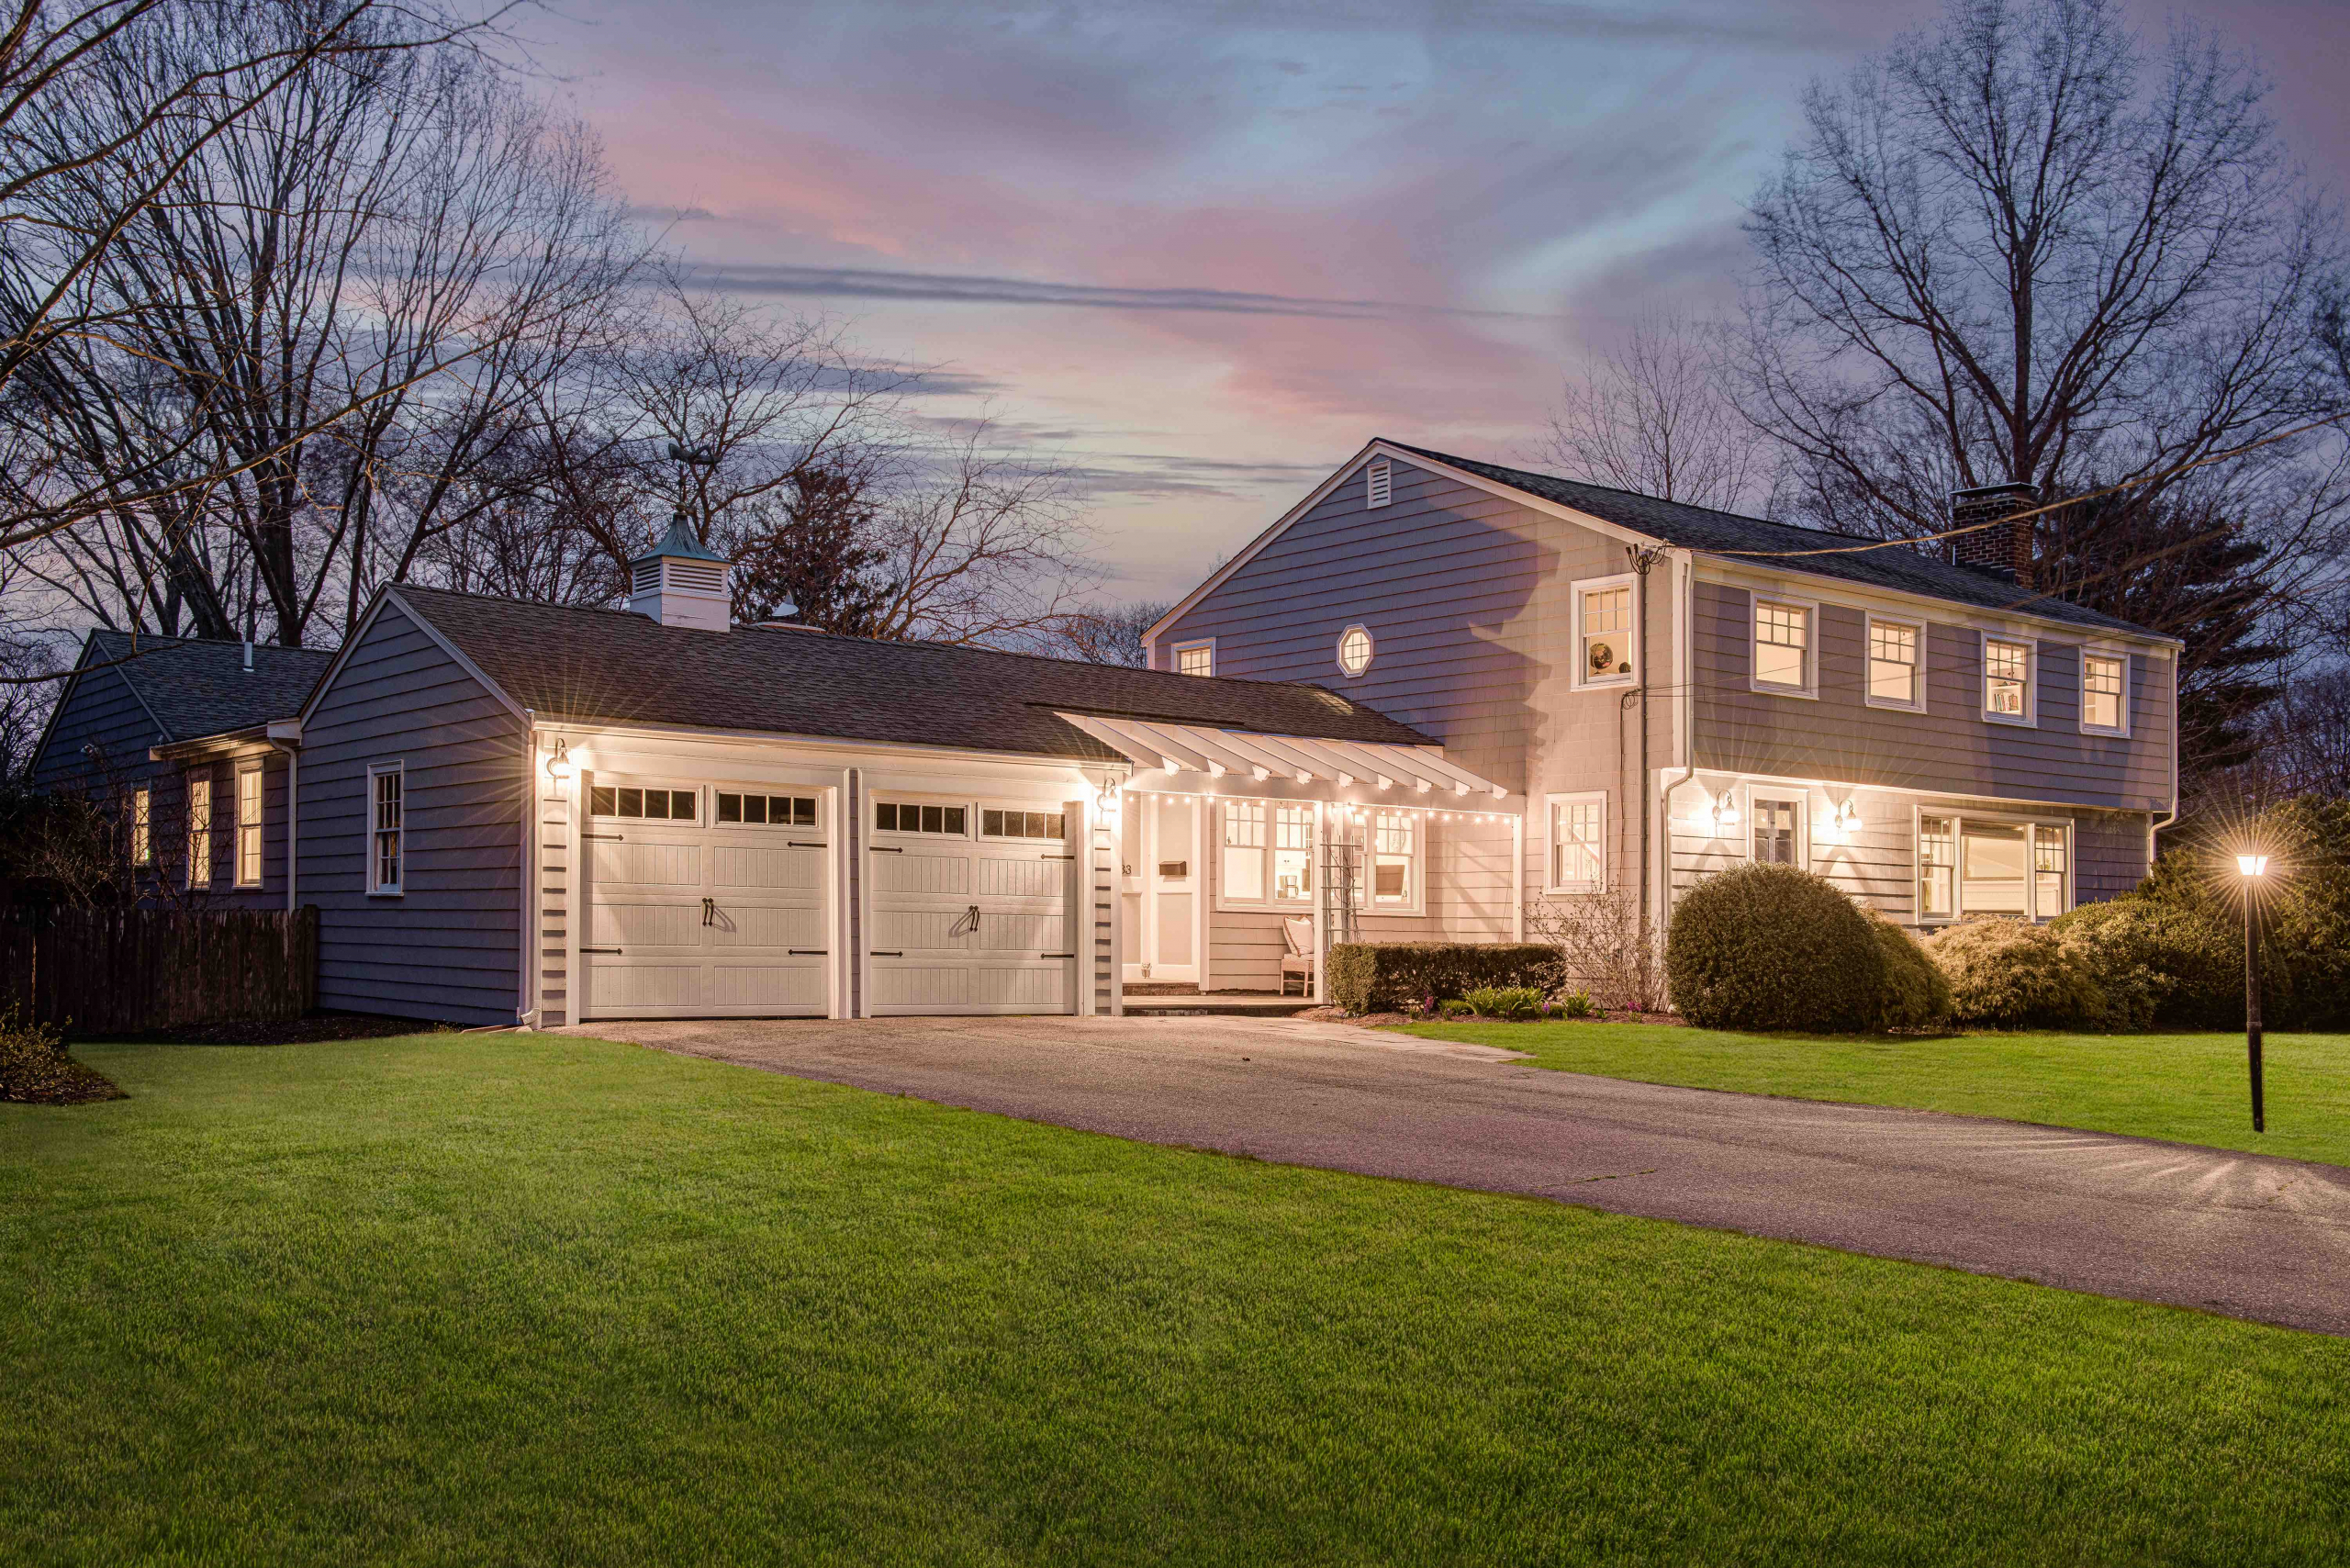 LISA SCHRYVER AND ELIZABETH KIRK OF COMPASS’ KIRK | SCHRYVER TEAM  SELL QUINTESSENTIAL BARRINGTON HOME FOR OVER ASKING PRICE